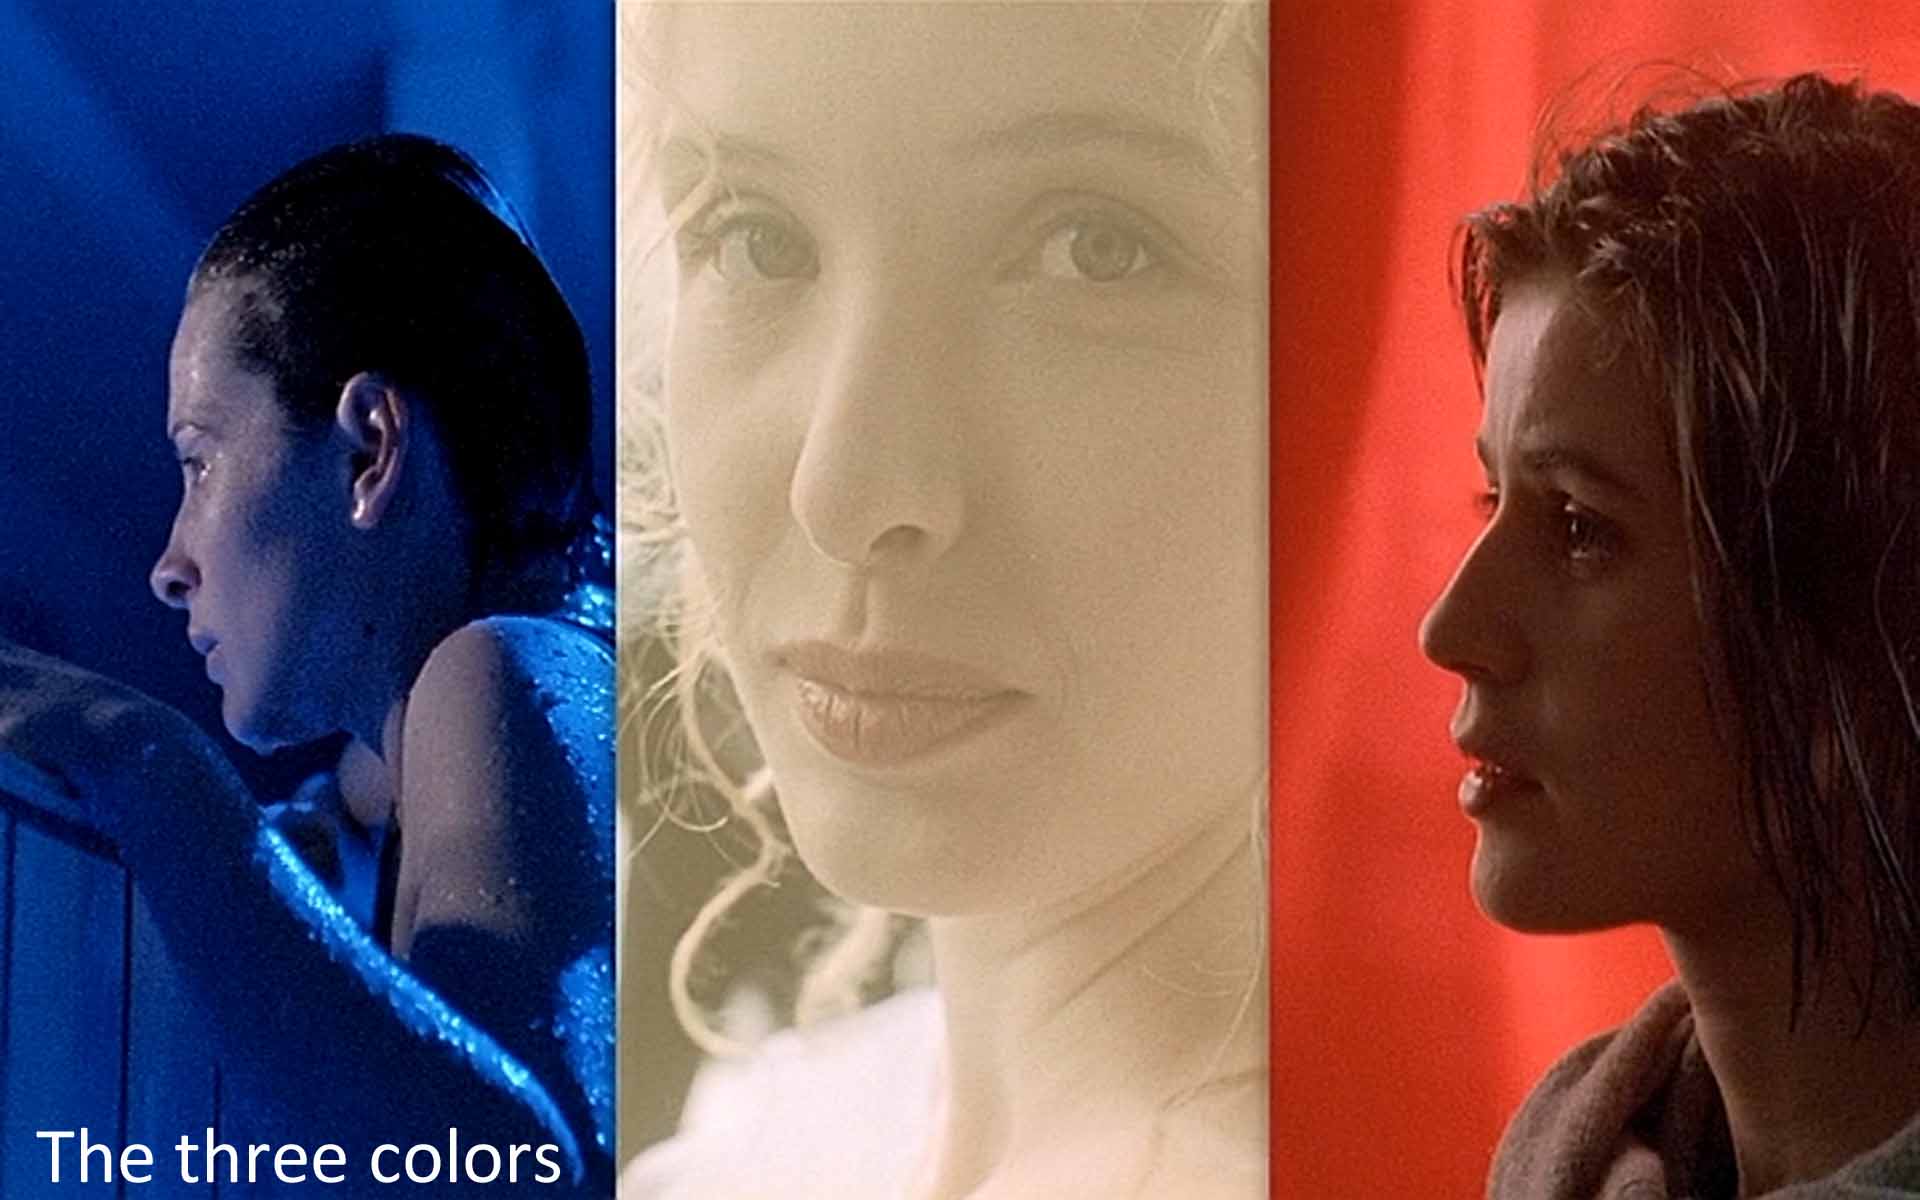 The three colors